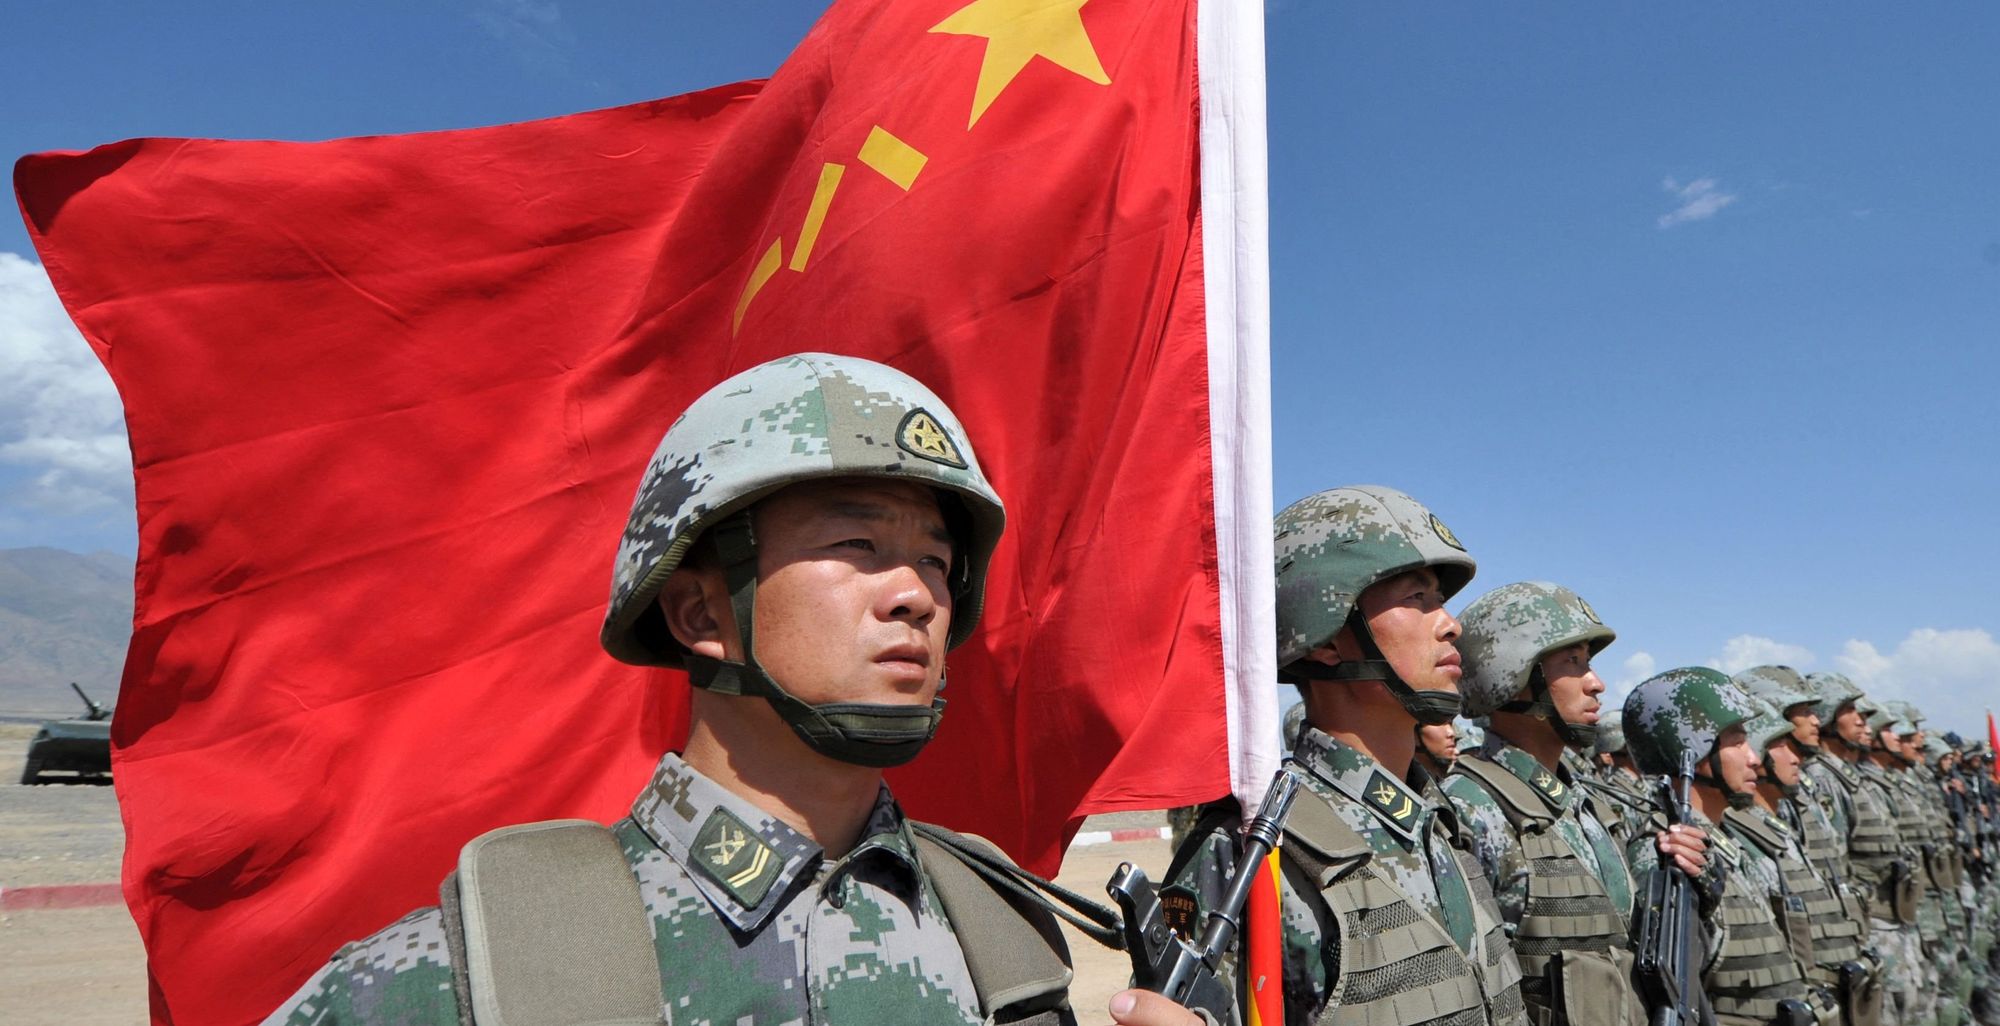 A Chinese soldier holding a flag during military exercises